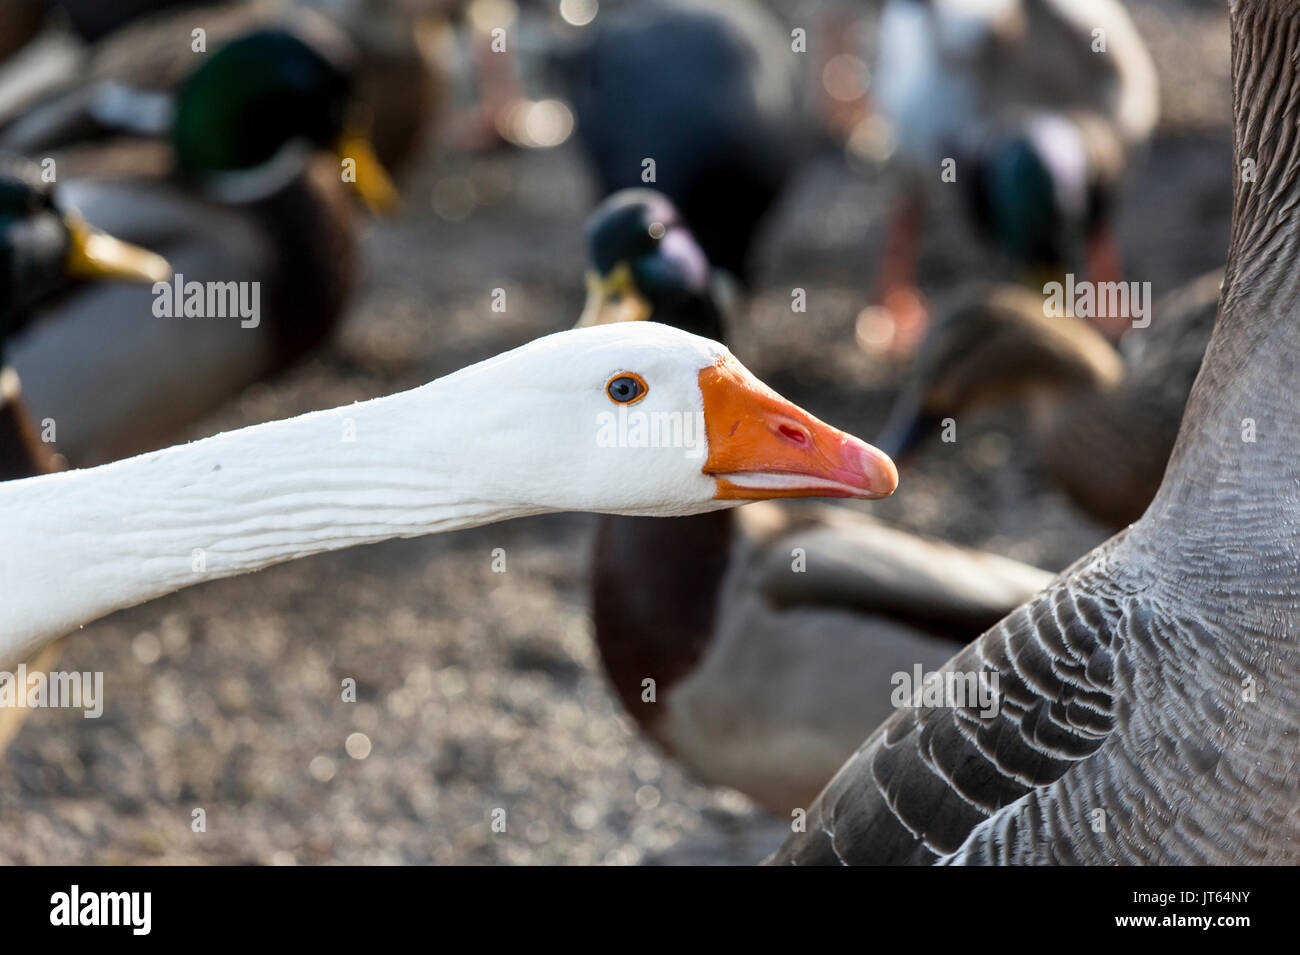 White Domestic Goose (Anser anser domesticus or Anser cygnoides domesticus) Portrait with other Ducks Stock Photo